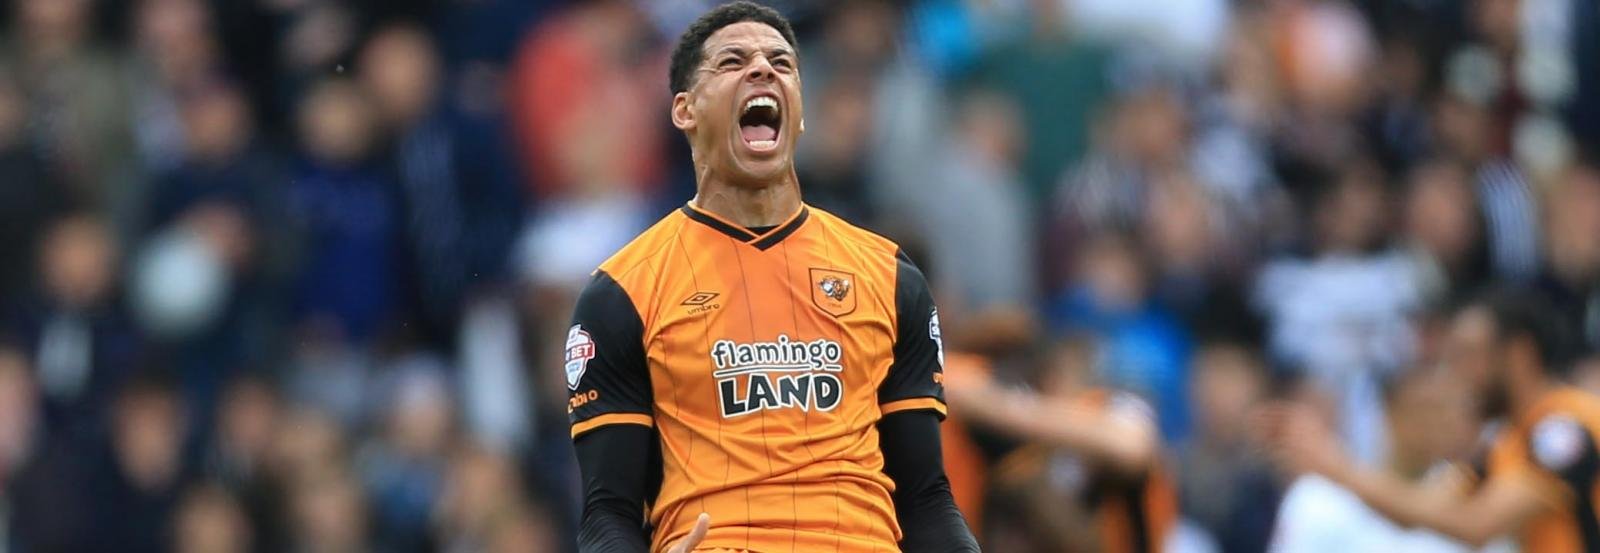 Hull City vs Derby County: Championship Play-Offs Preview & Prediction